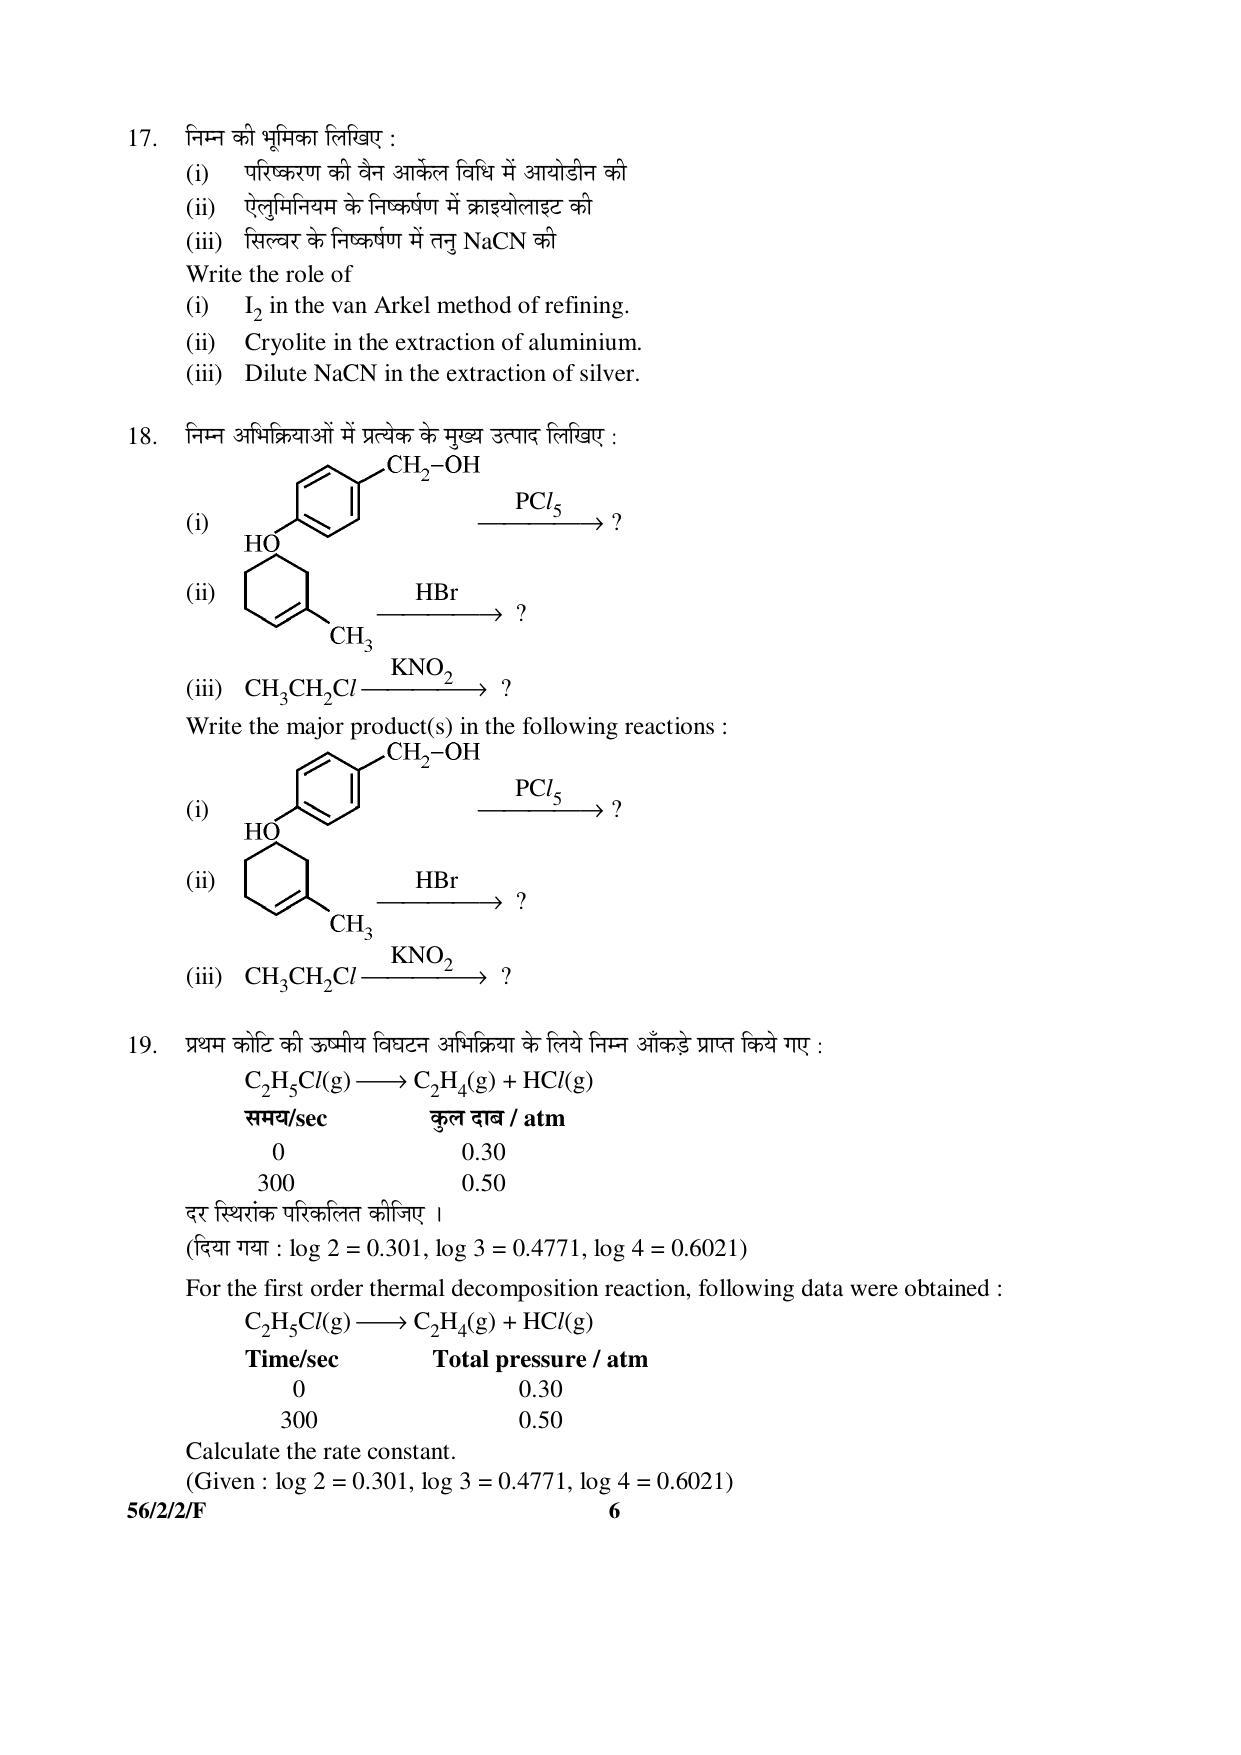 CBSE Class 12 56-2-2-F _Chemistry_ 2016 Question Paper - Page 6